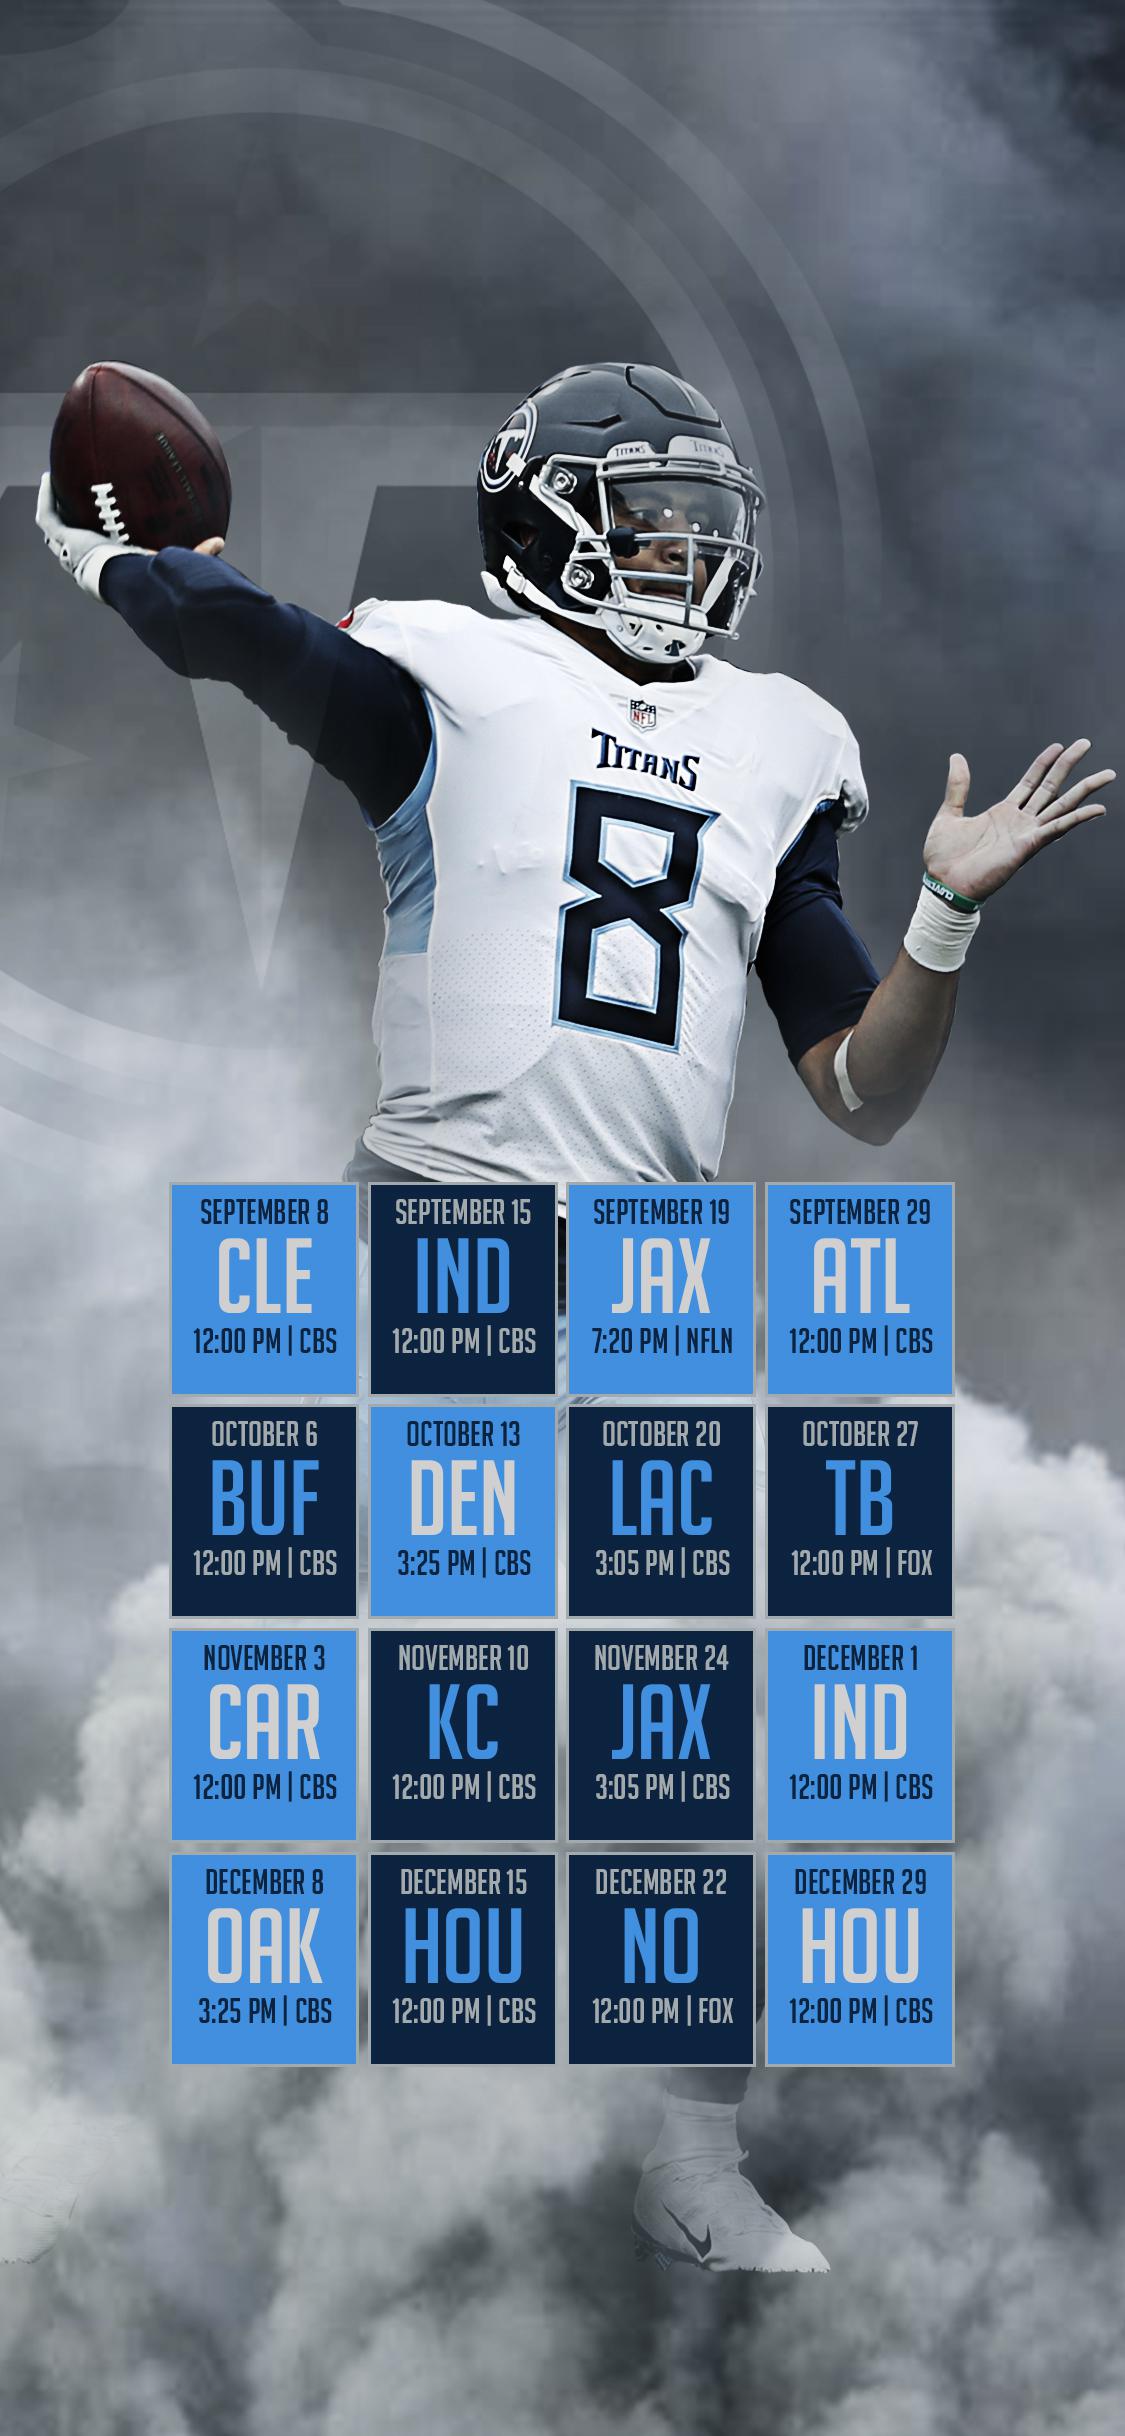 A 2019 schedule wallpaper I made. Link to more in comments